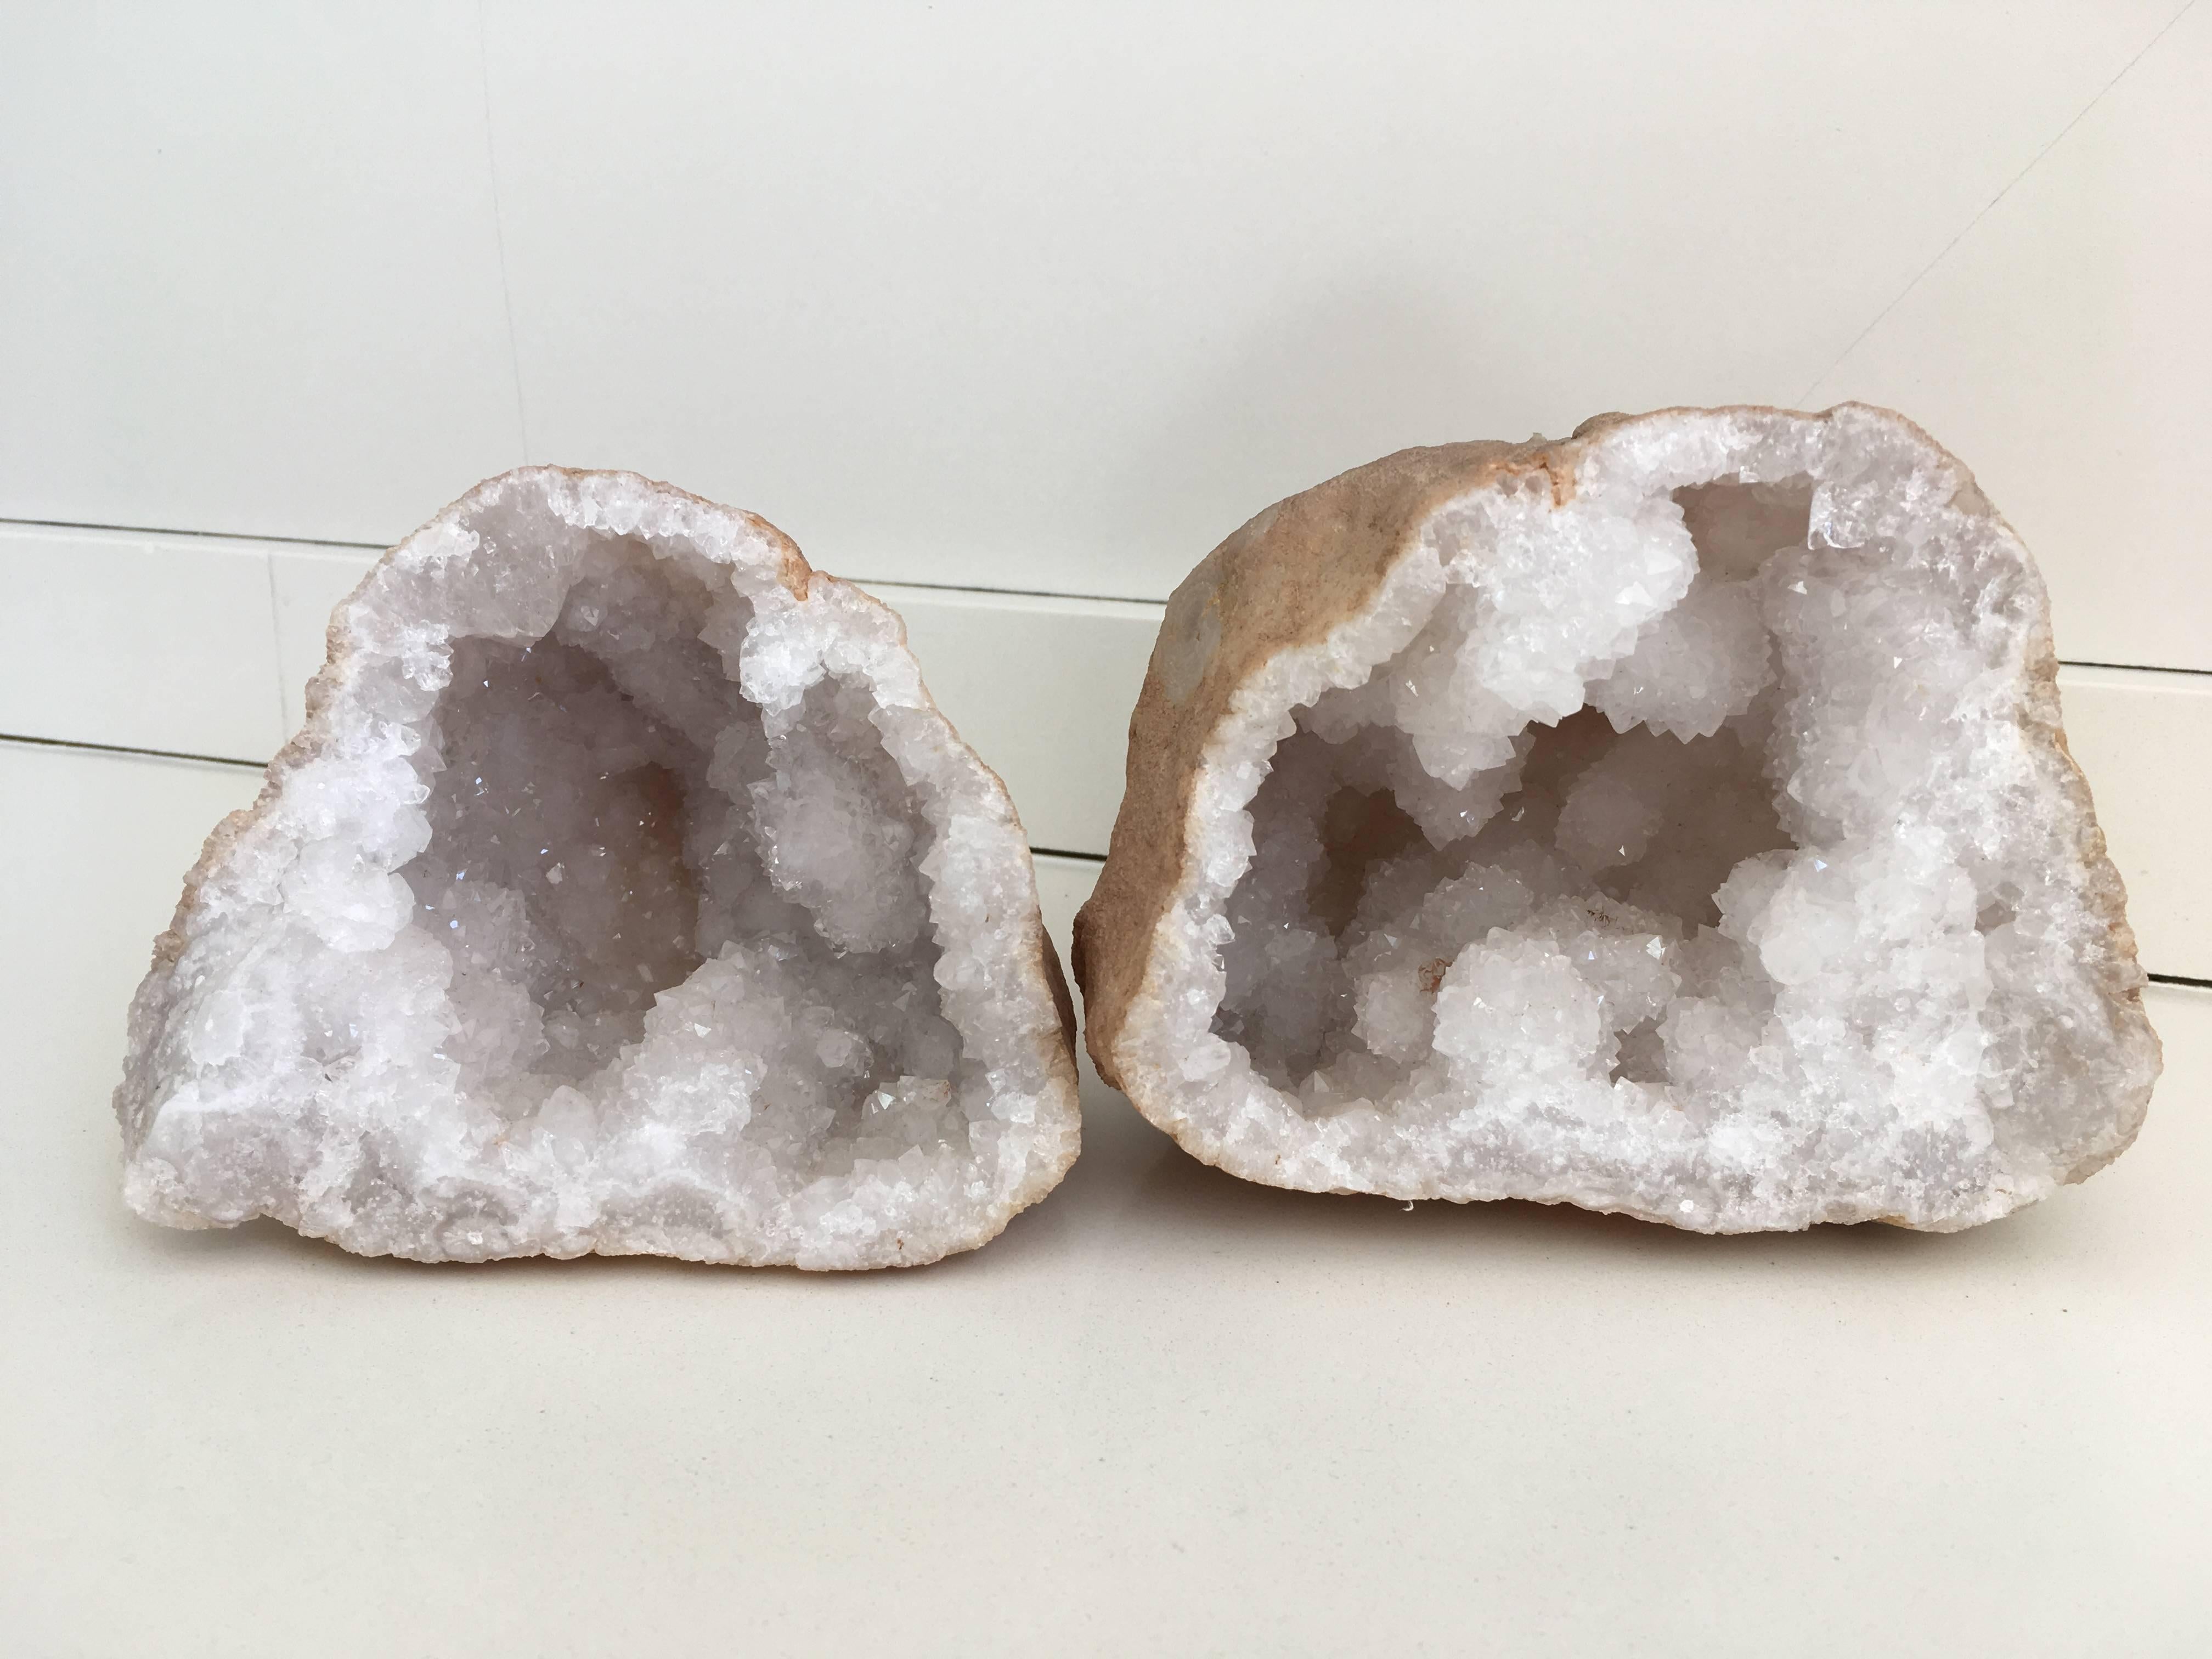 White Rock Crystal Geode Natural Specimen Sculpture its divided into two parts.

